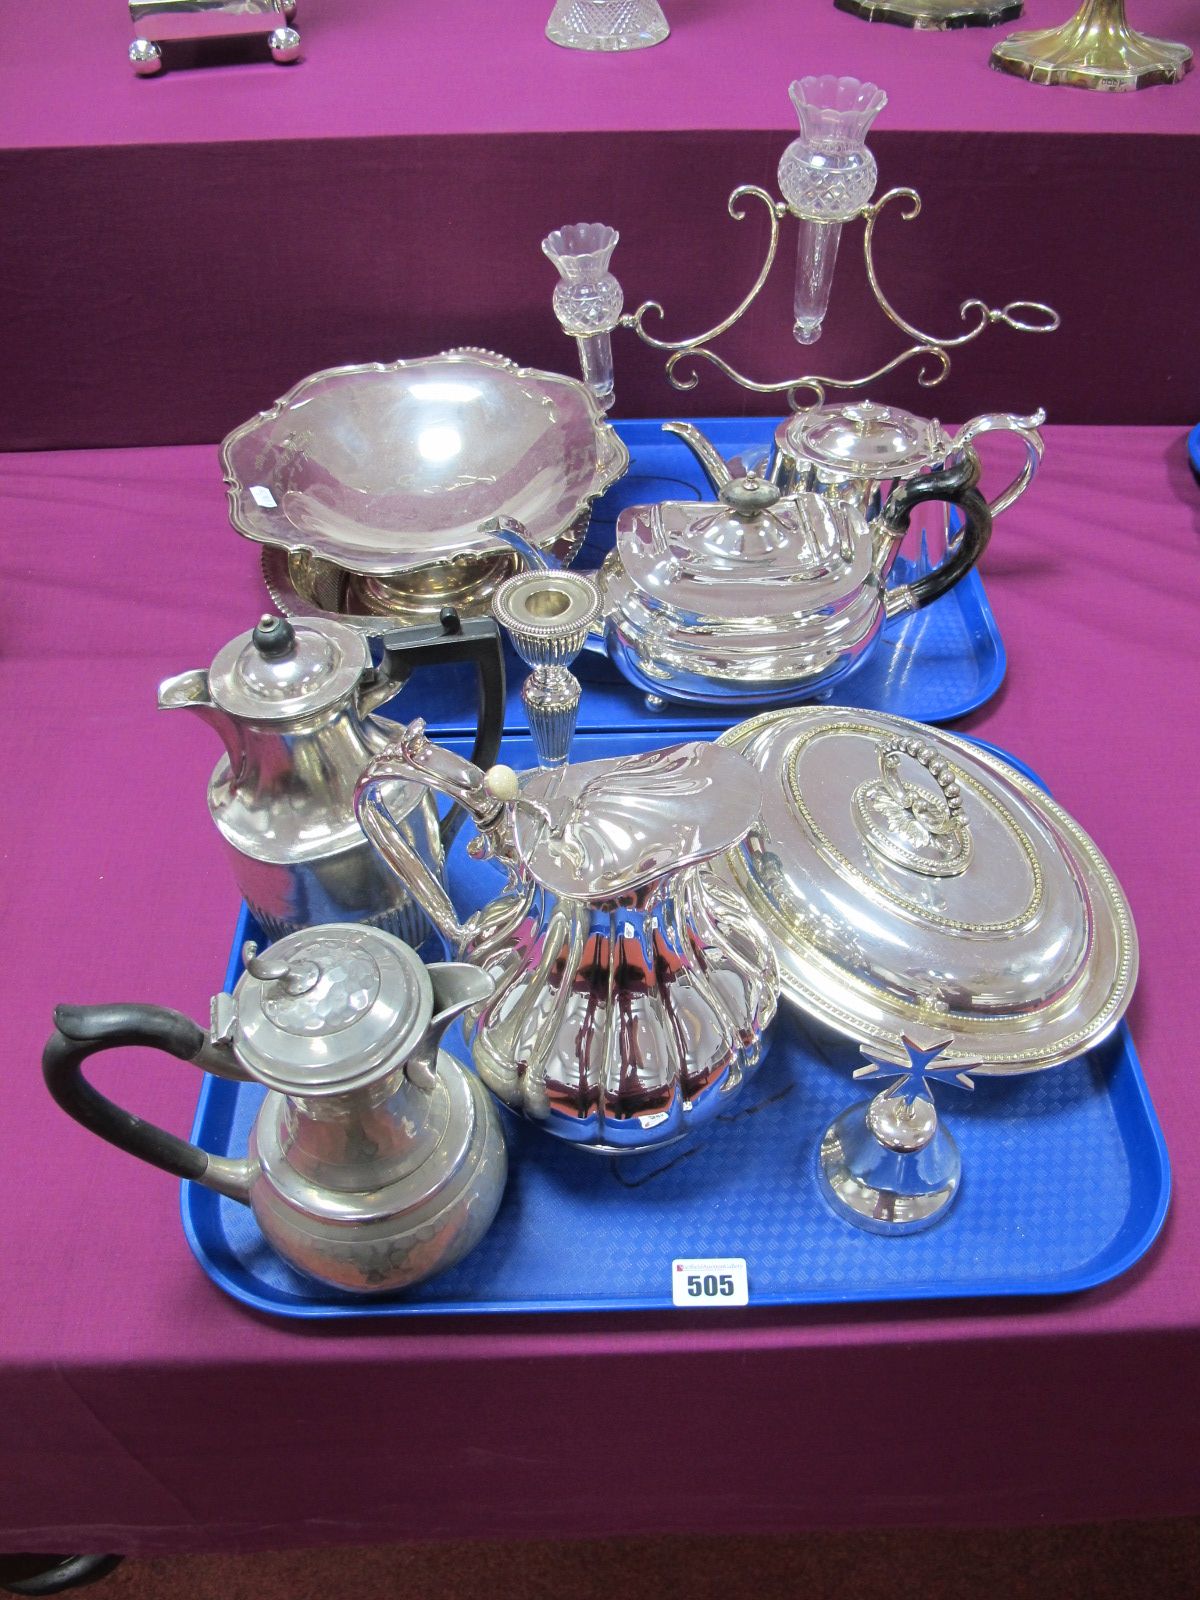 Plated Tea Pots, twin branch epergne with thistle flutes (one missing), footed dish, entree dish,